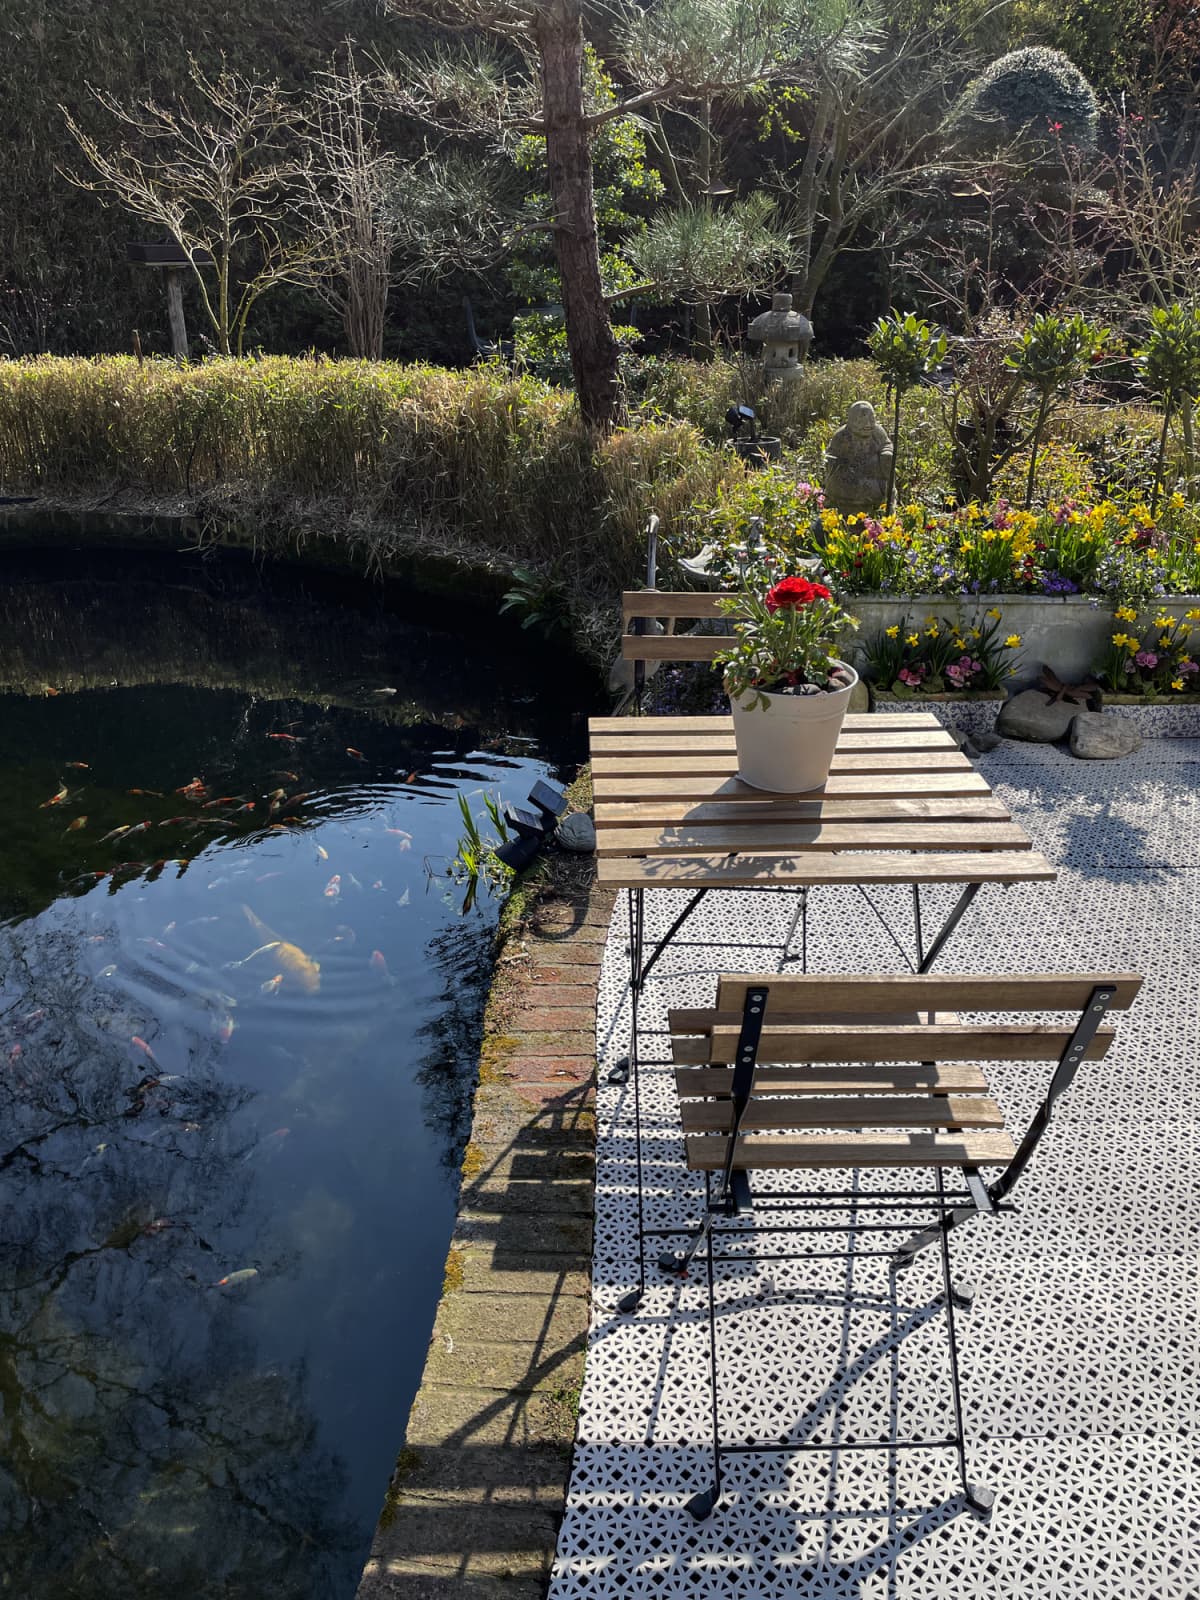 Fish pond next to seating area